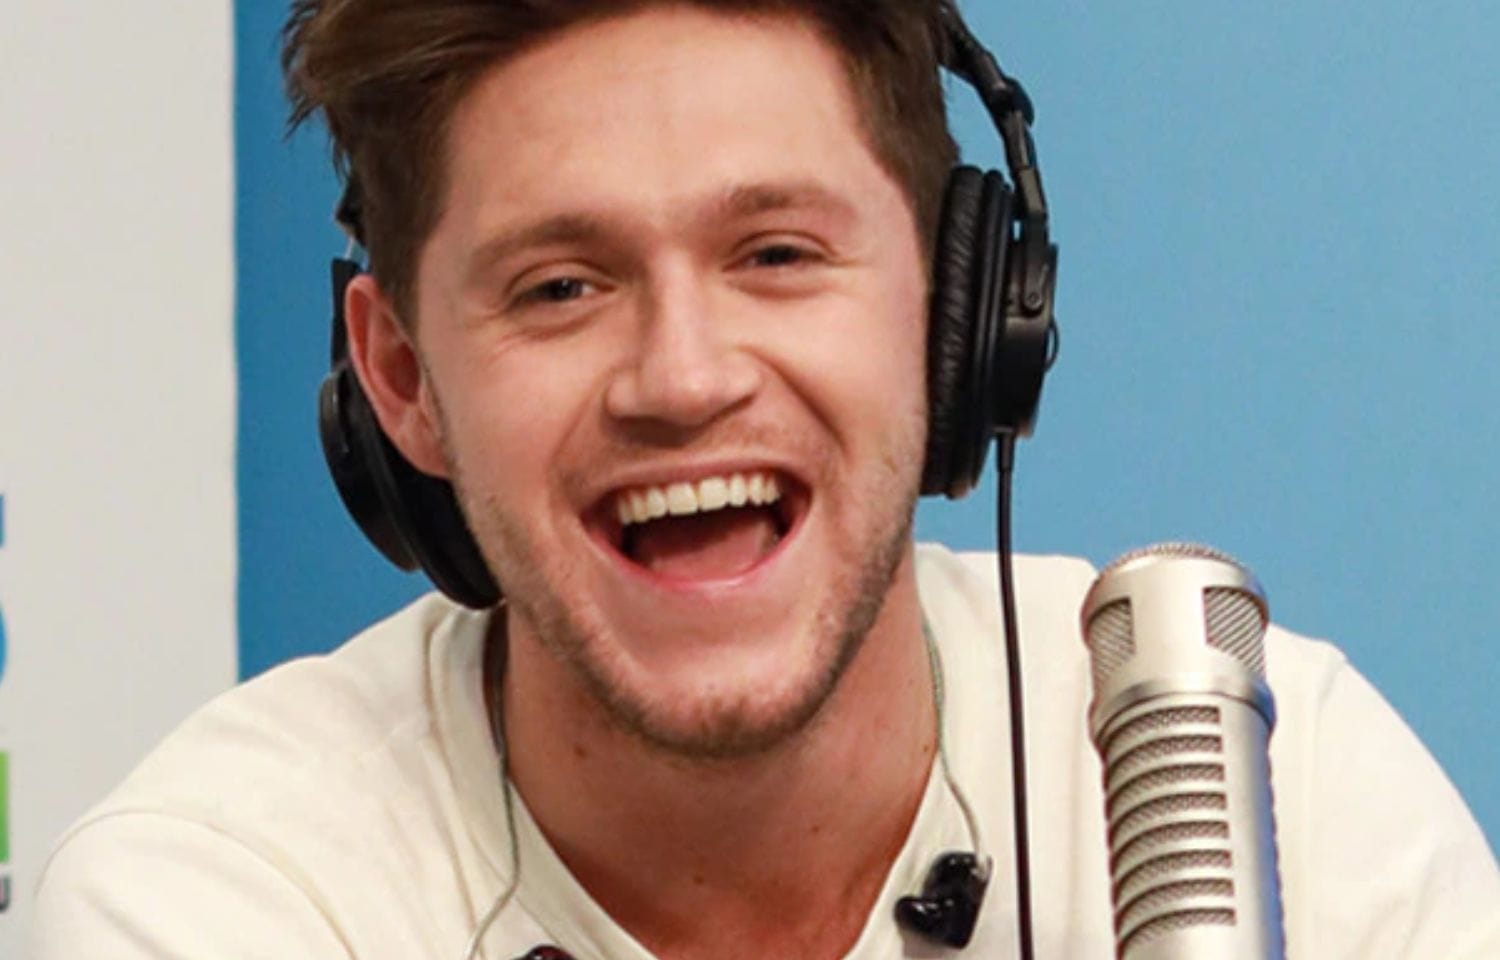 Niall Horan’s Third Album ‘The Show’ Set to Release in June